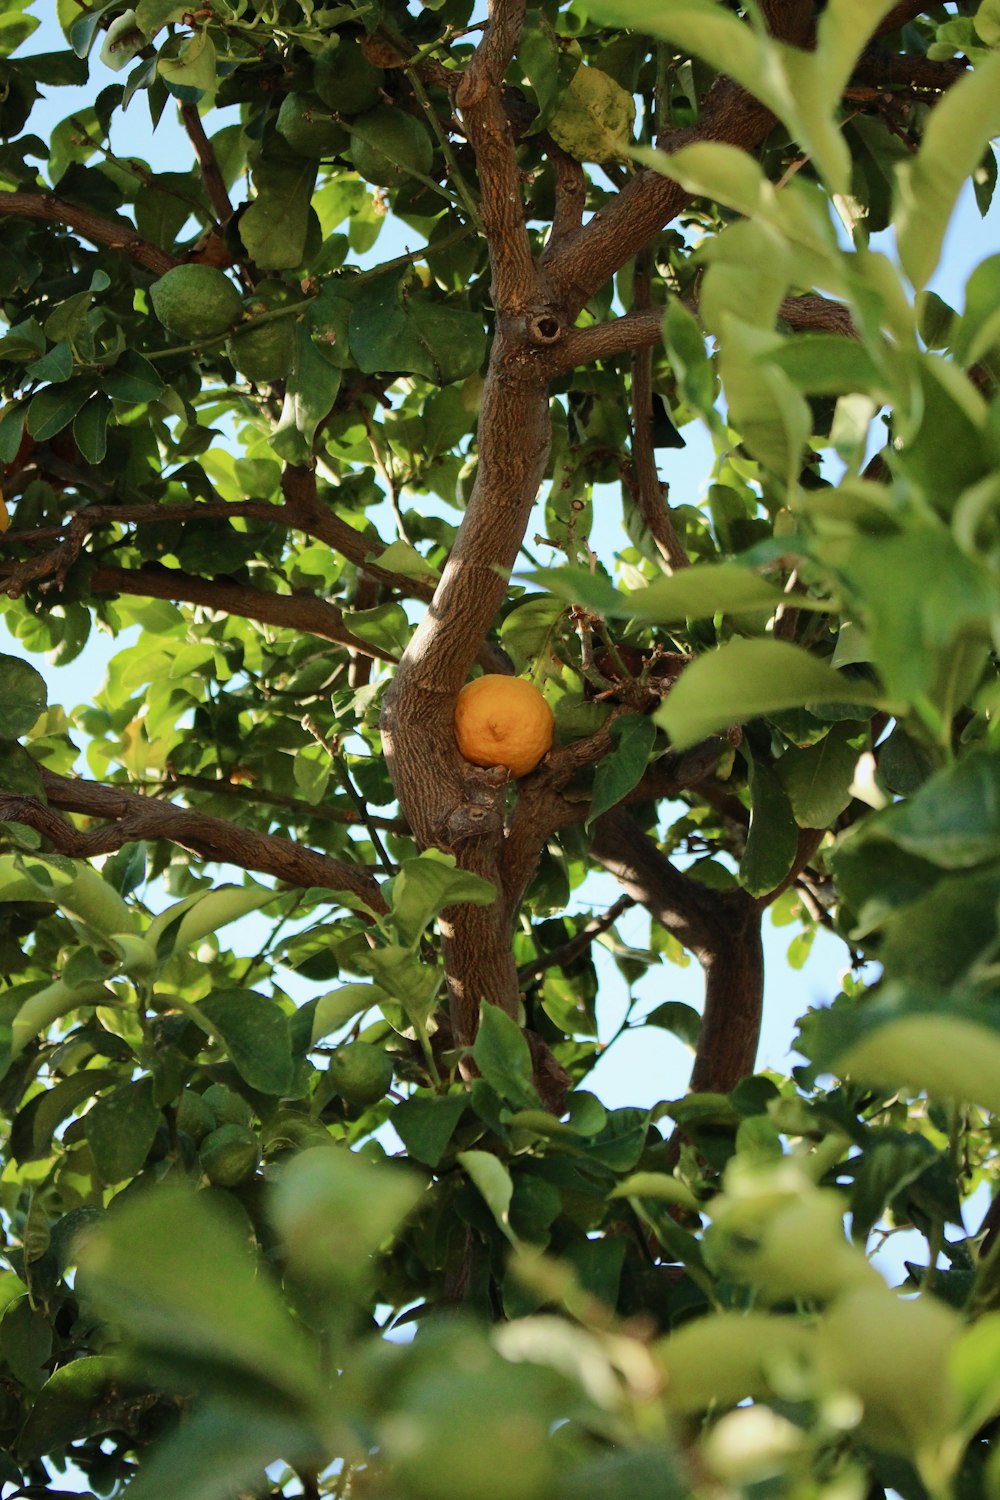 an orange is growing on a tree branch